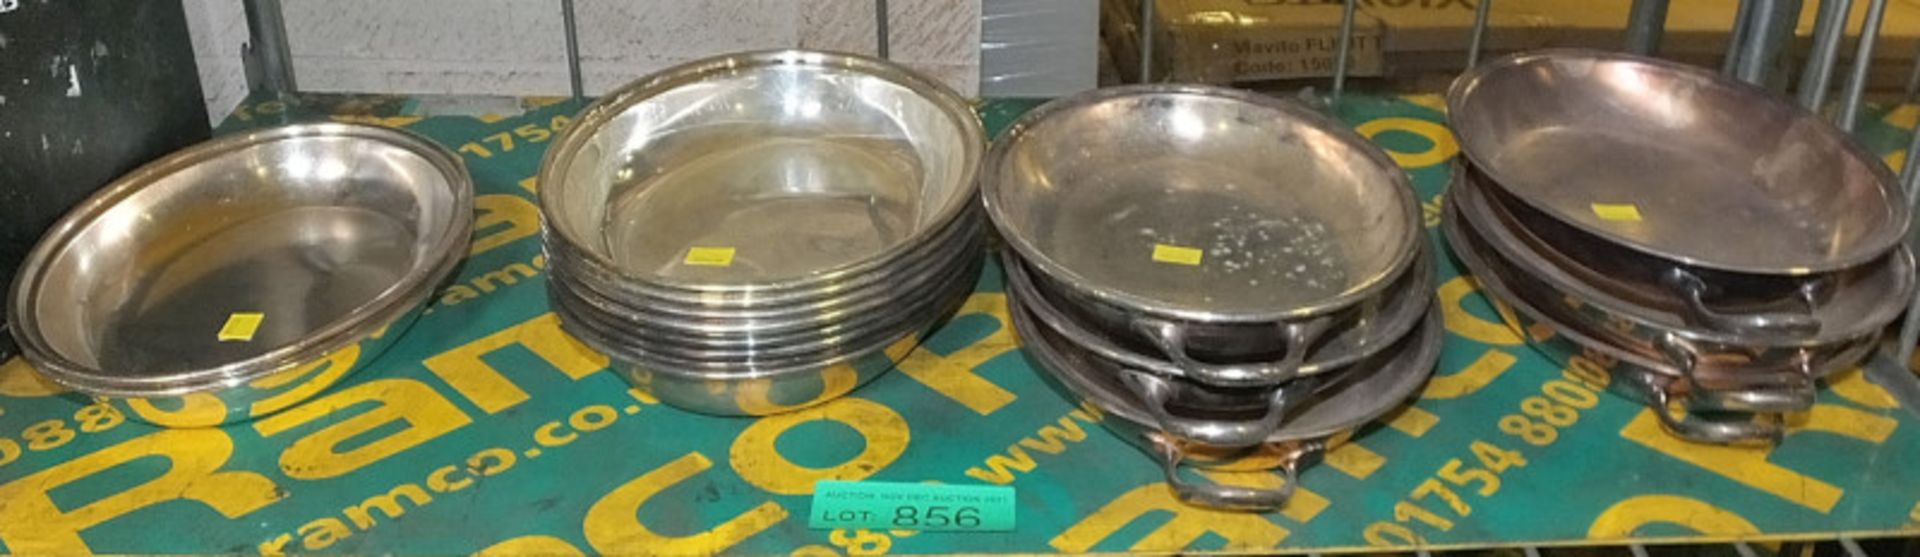 EPNS Oval Serving Dishes x16